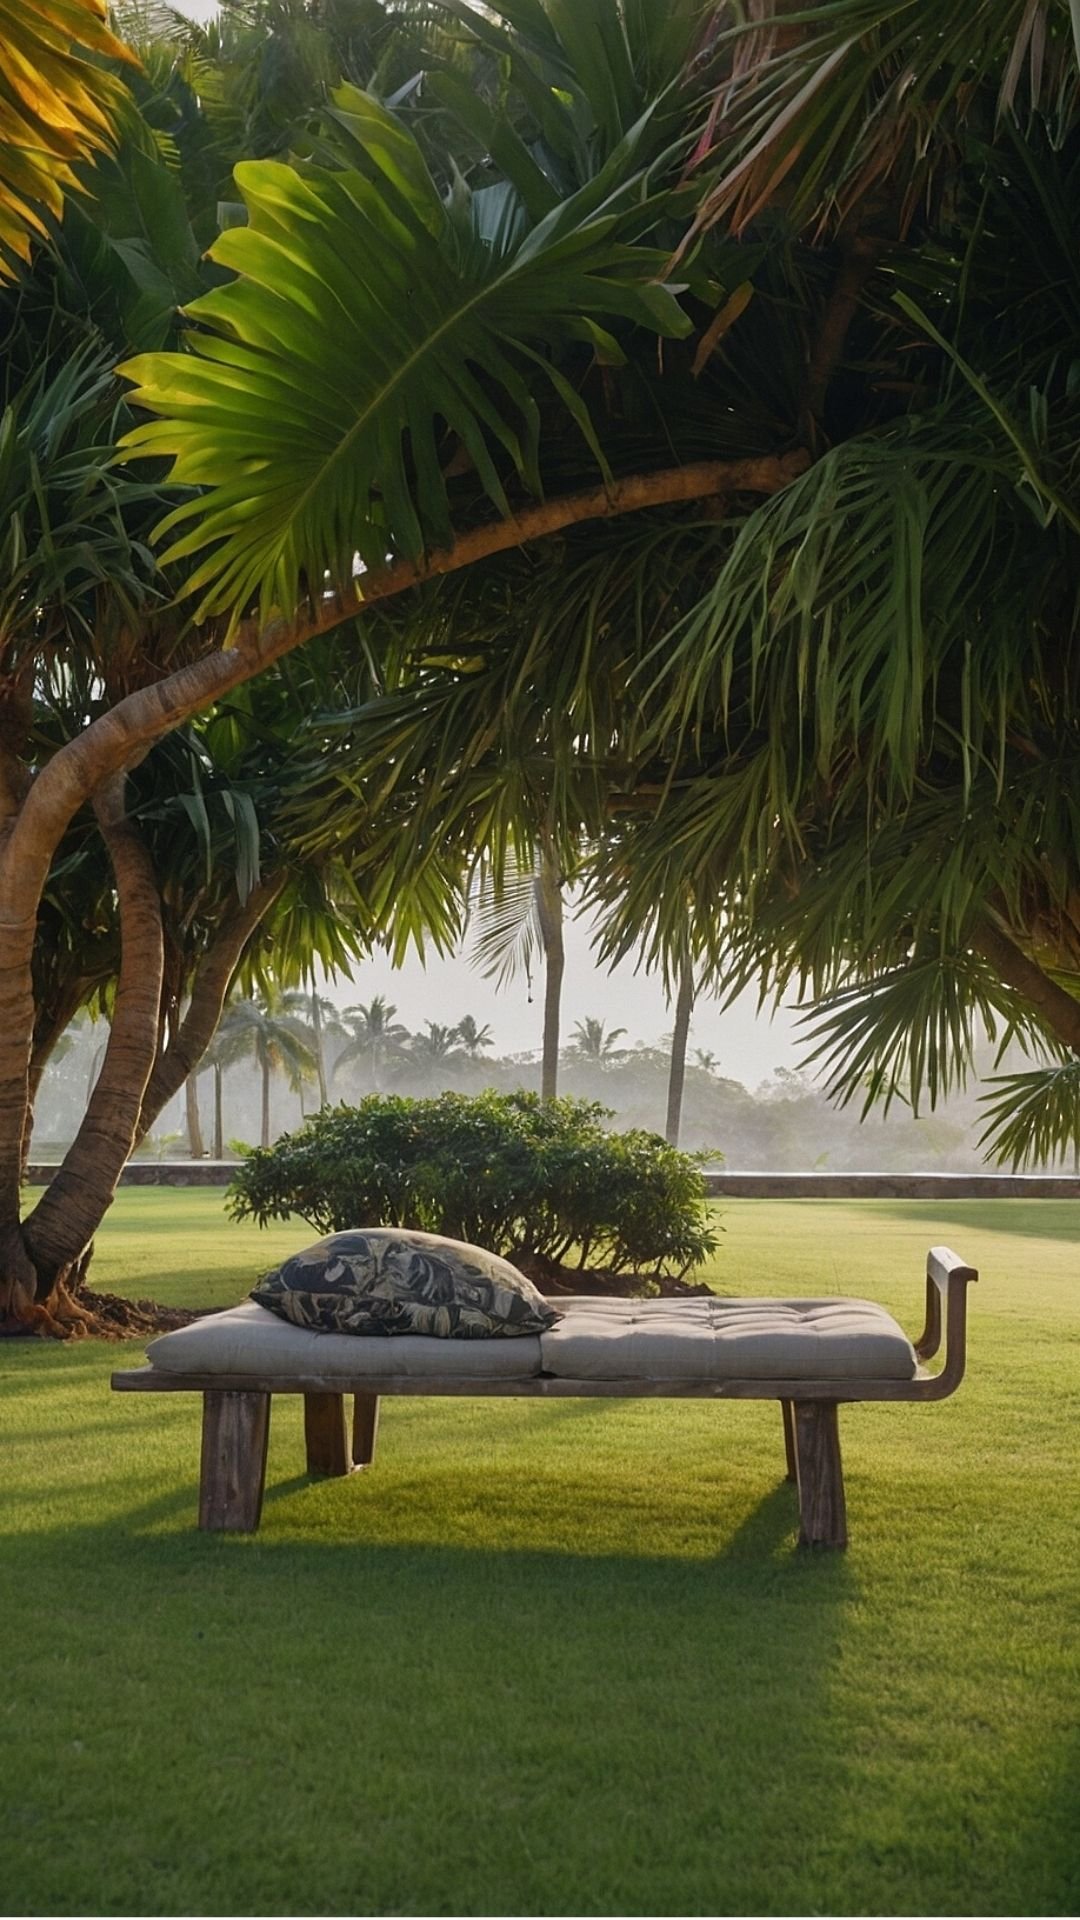 Sunset Repose: The Lounging Glory of the Tropics